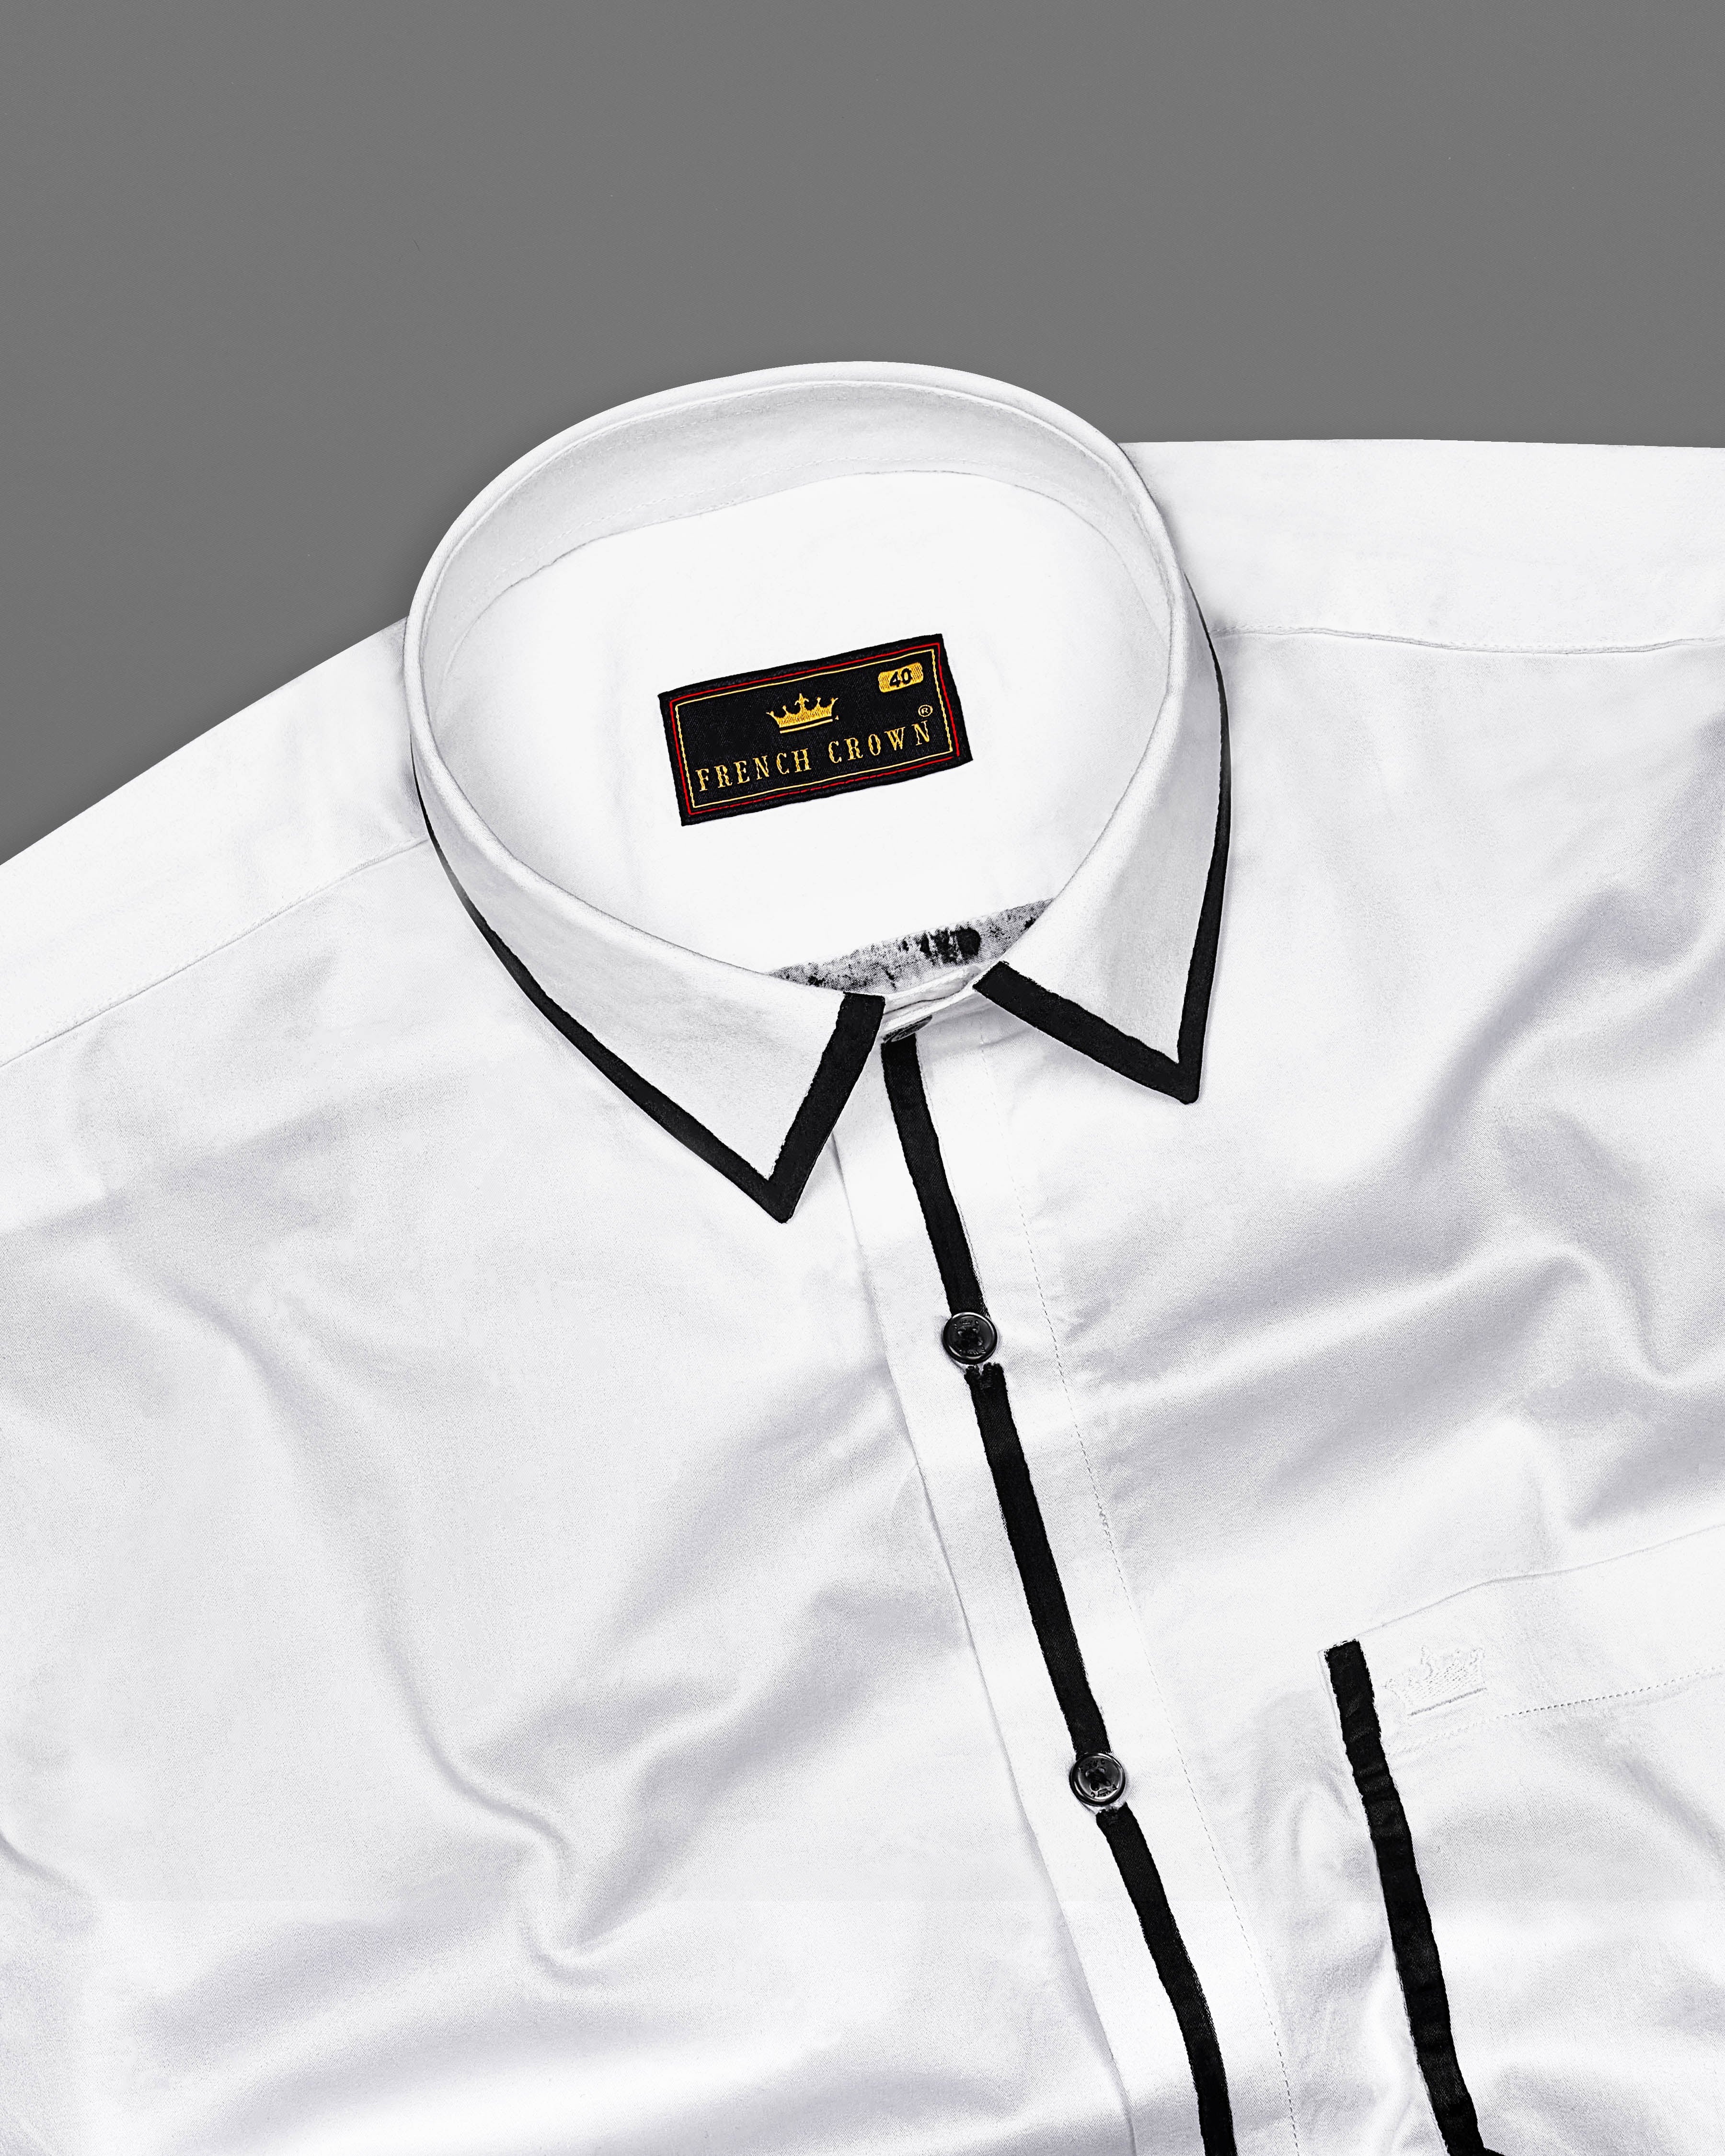 Bright White Subtle Sheen Embellished with Black Hand Painted Lines Super Soft Premium Cotton Designer Shirt 8935-BLK-ART-38,8935-BLK-ART-H-38,8935-BLK-ART-39,8935-BLK-ART-H-39,8935-BLK-ART-40,8935-BLK-ART-H-40,8935-BLK-ART-42,8935-BLK-ART-H-42,8935-BLK-ART-44,8935-BLK-ART-H-44,8935-BLK-ART-46,8935-BLK-ART-H-46,8935-BLK-ART-48,8935-BLK-ART-H-48,8935-BLK-ART-50,8935-BLK-ART-H-50,8935-BLK-ART-52,8935-BLK-ART-H-52